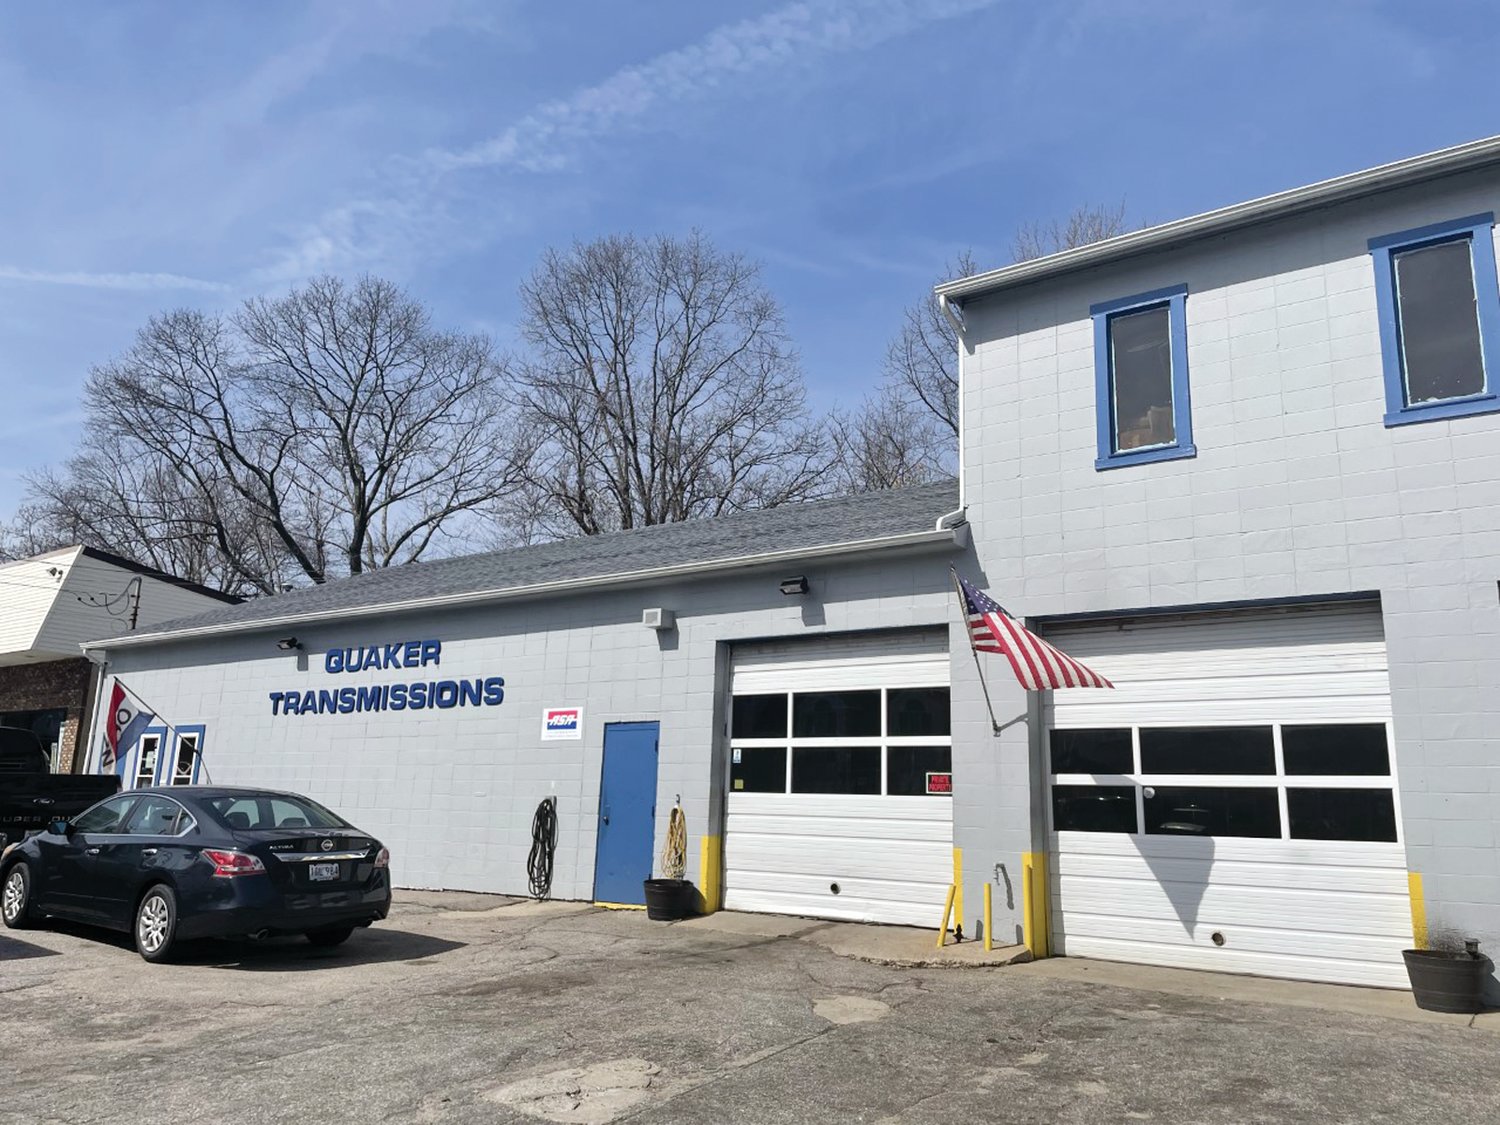 Bring your vehicle to Quaker Transmissions for the maintenance, repair and replacement of your vehicle’s transmission, as well as for all general repairs. The team of talented and experienced technicians is ready to take your call.